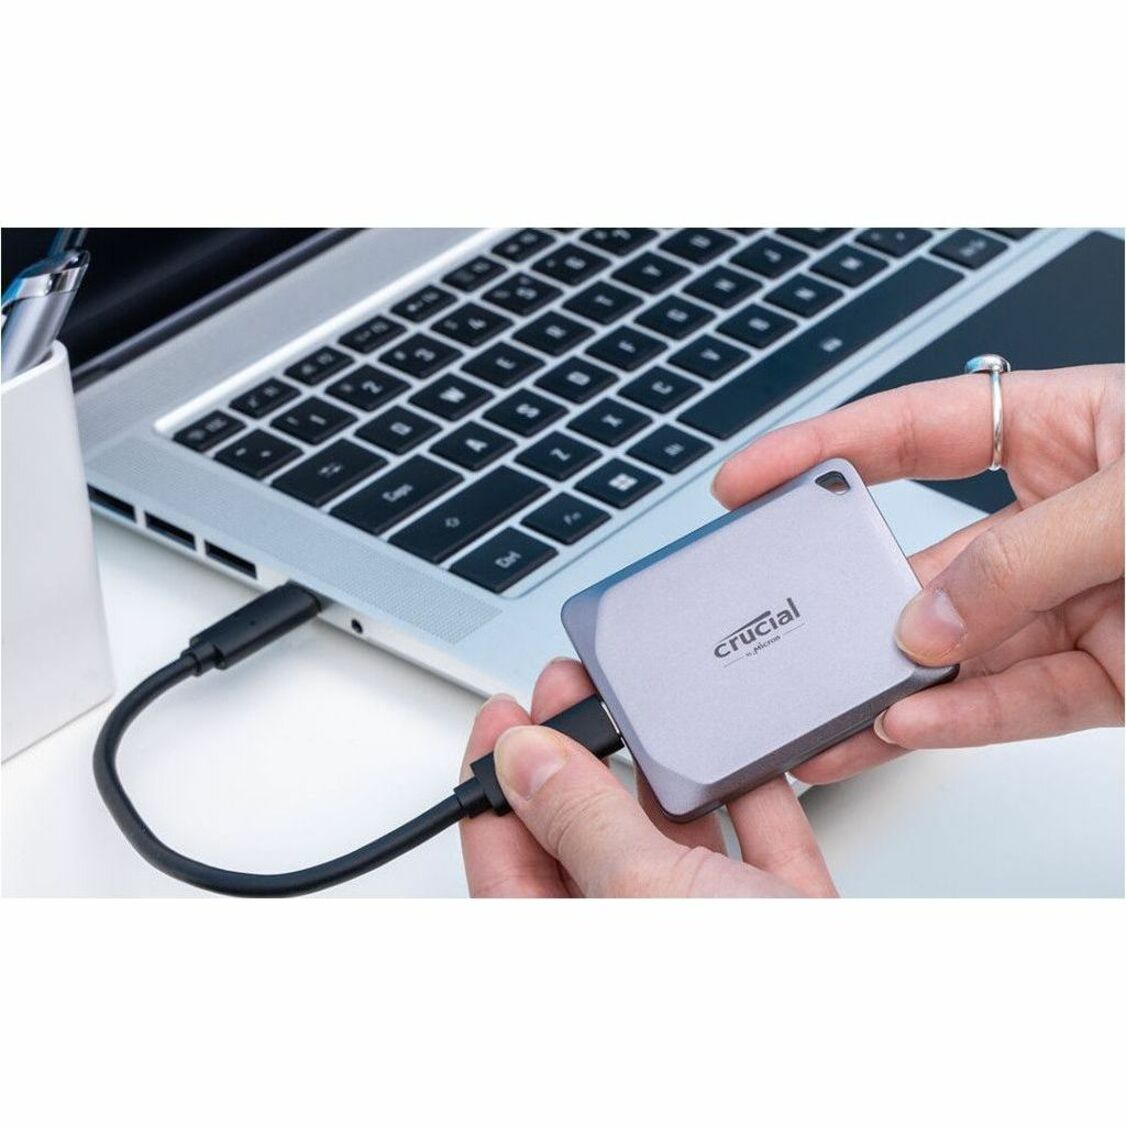 CRUCIAL/MICRON - IMSOURCING CT1000X9PROSSD9 X9 Pro 1TB Portable SSD, USB 3.2 Type C, 1050 MB/s Transfer Rate